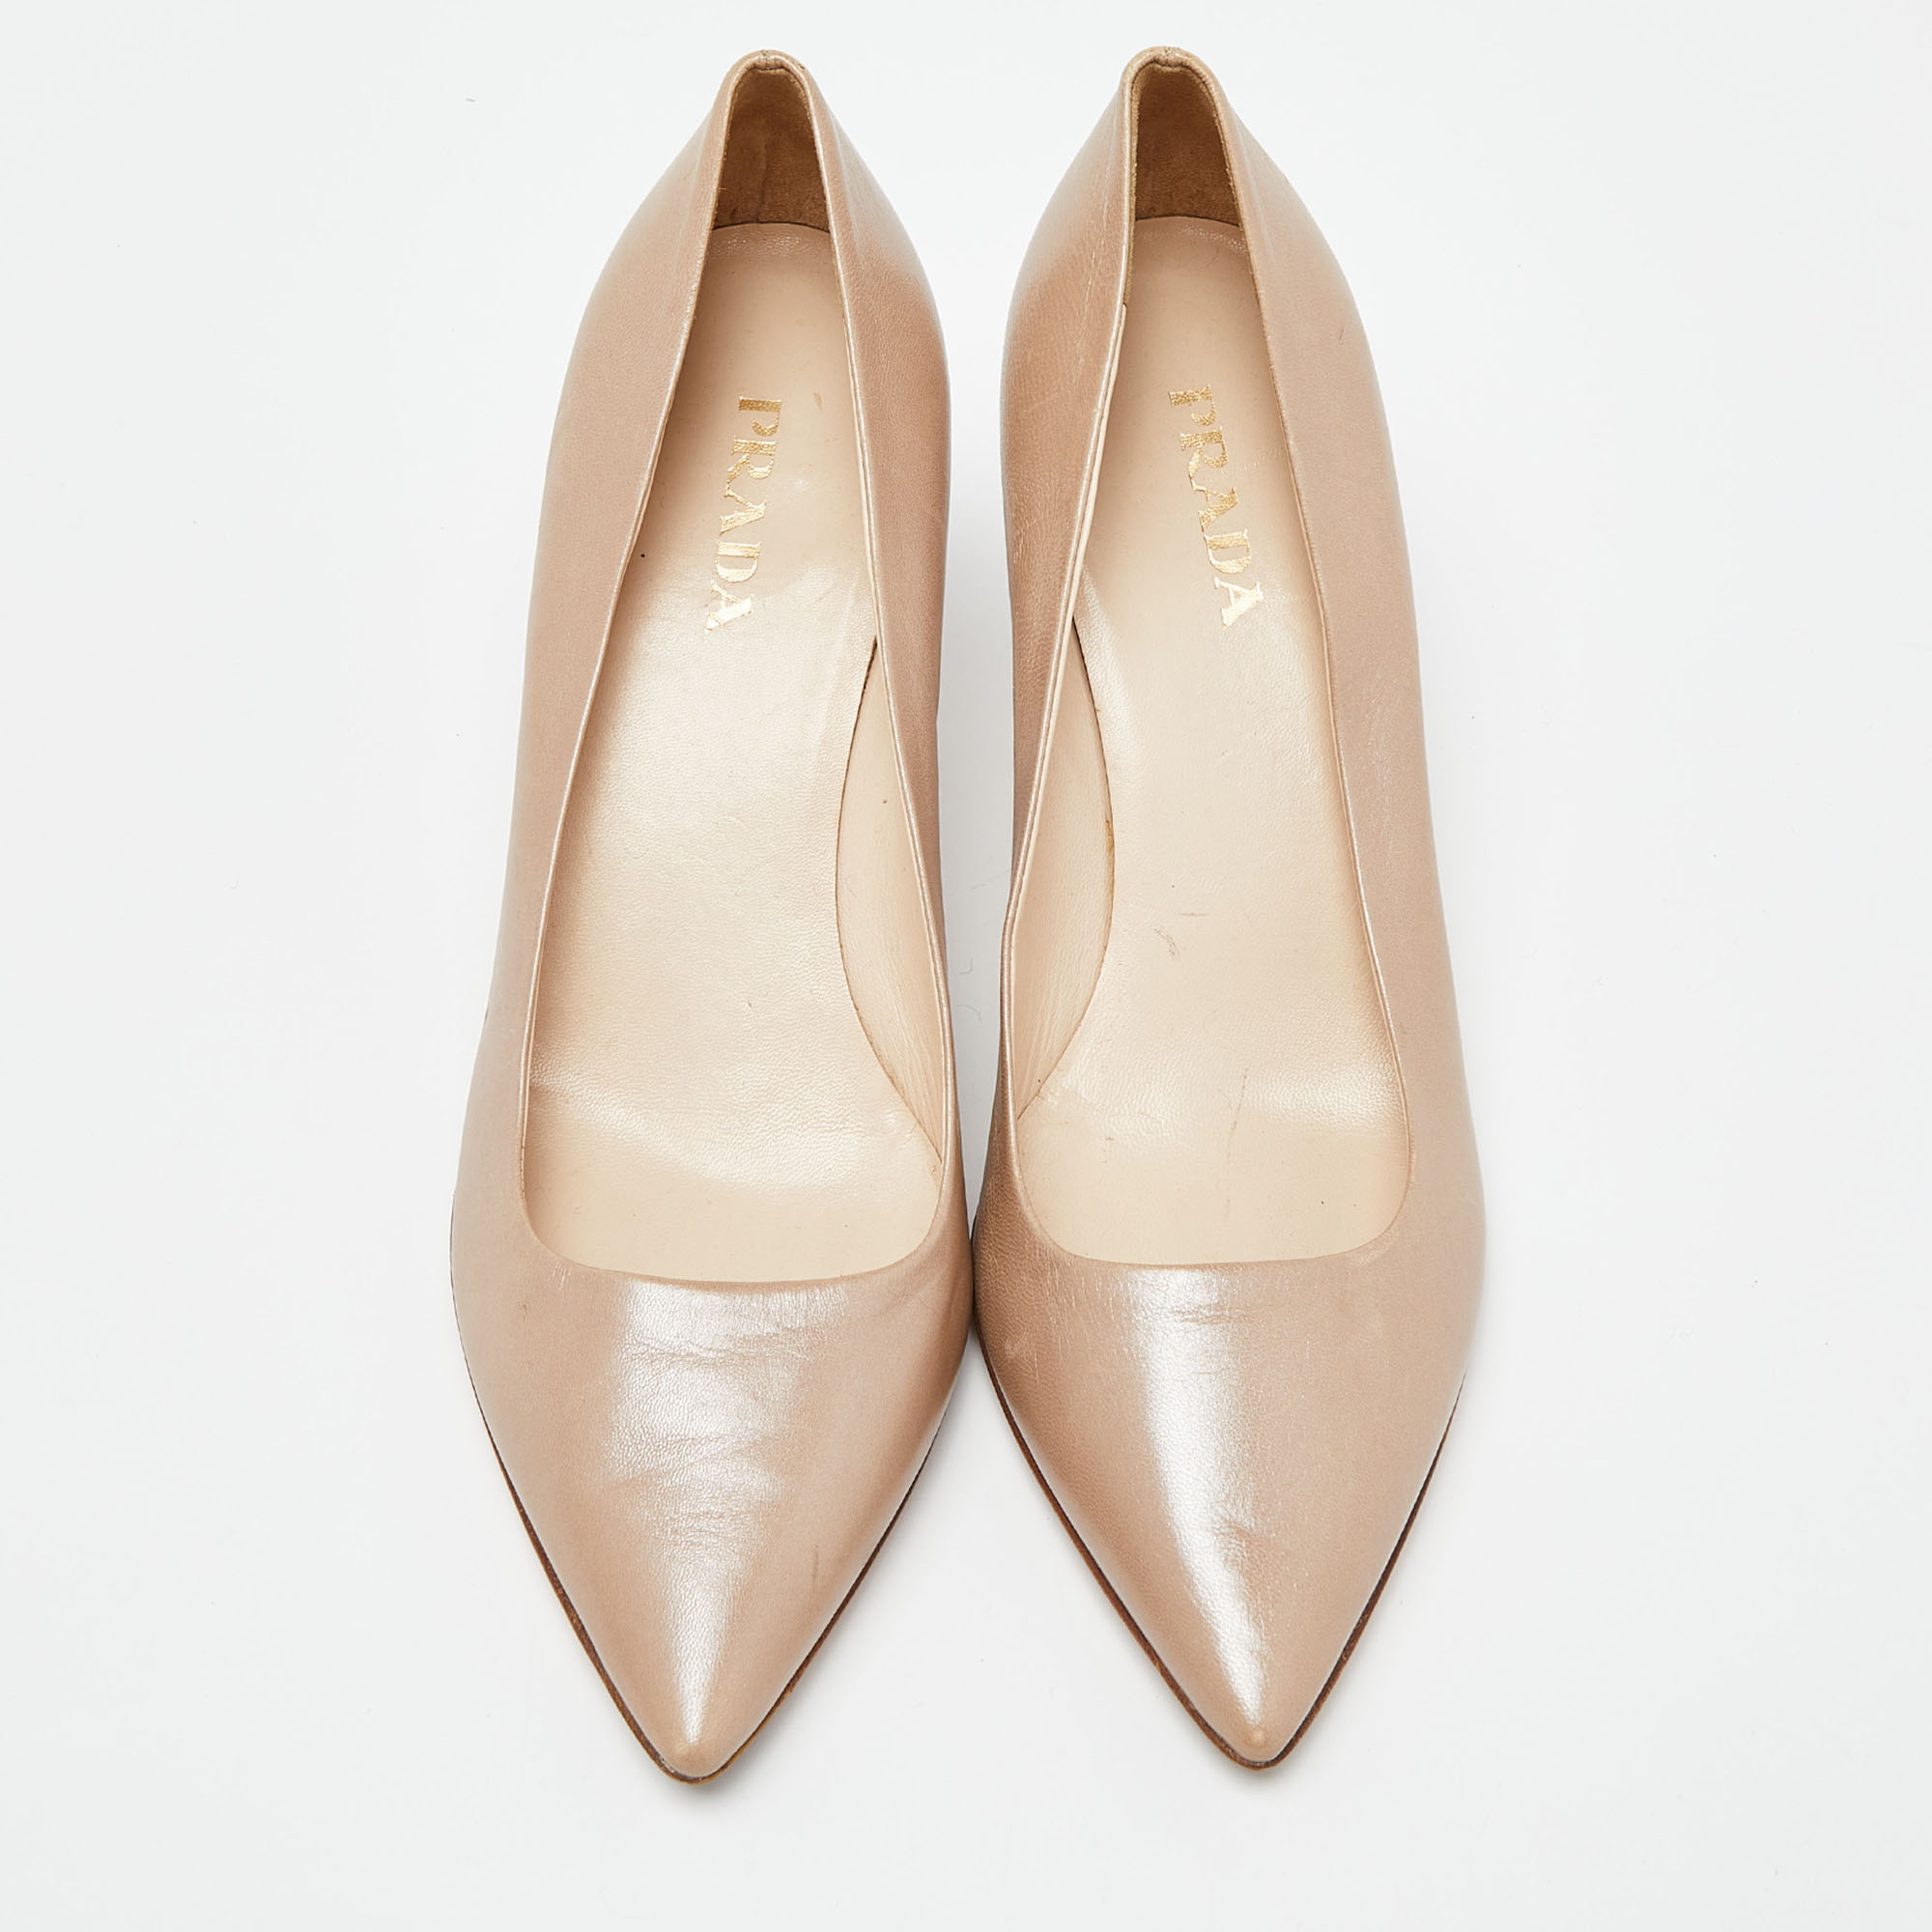 Prada Beige Leather Pointed Toe Pumps Size 39